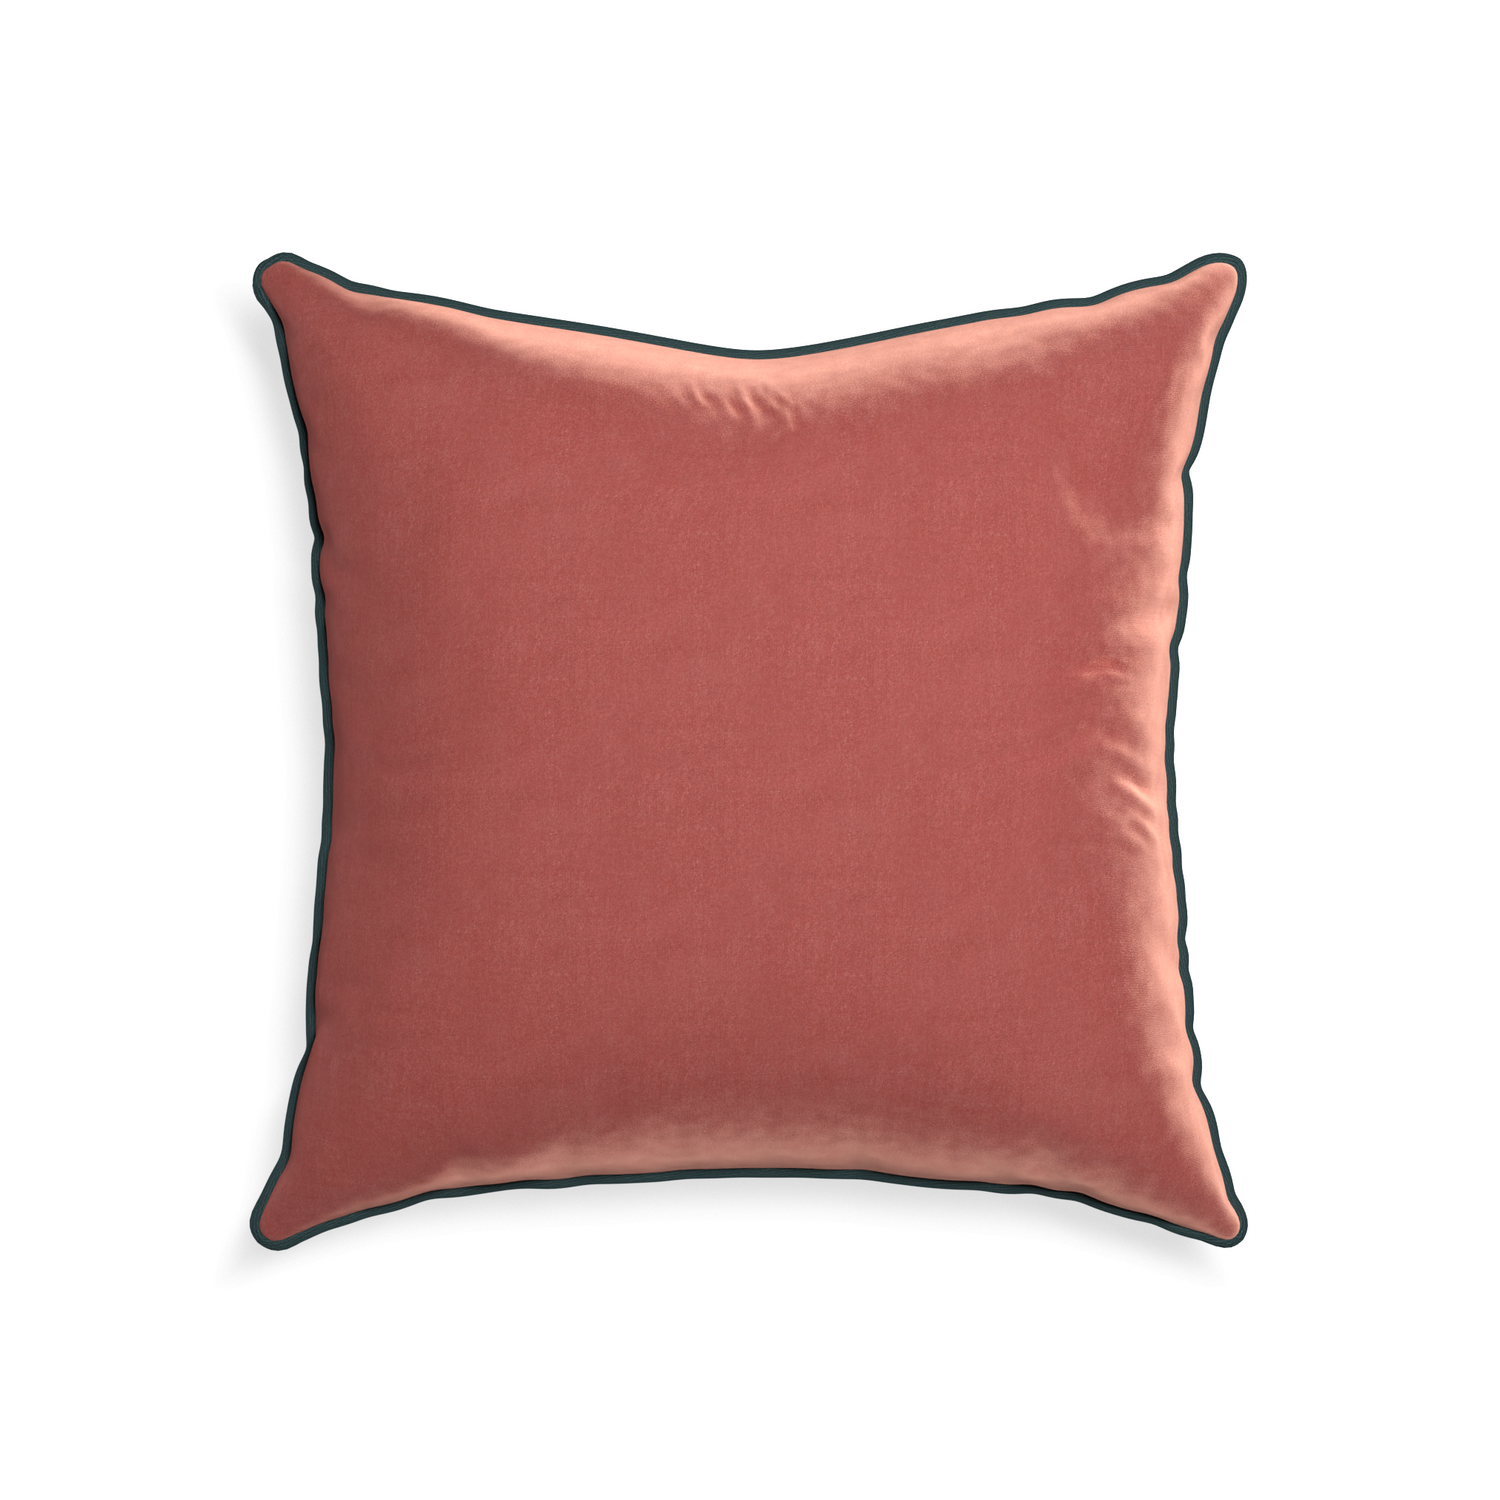 22-square cosmo velvet custom coralpillow with p piping on white background